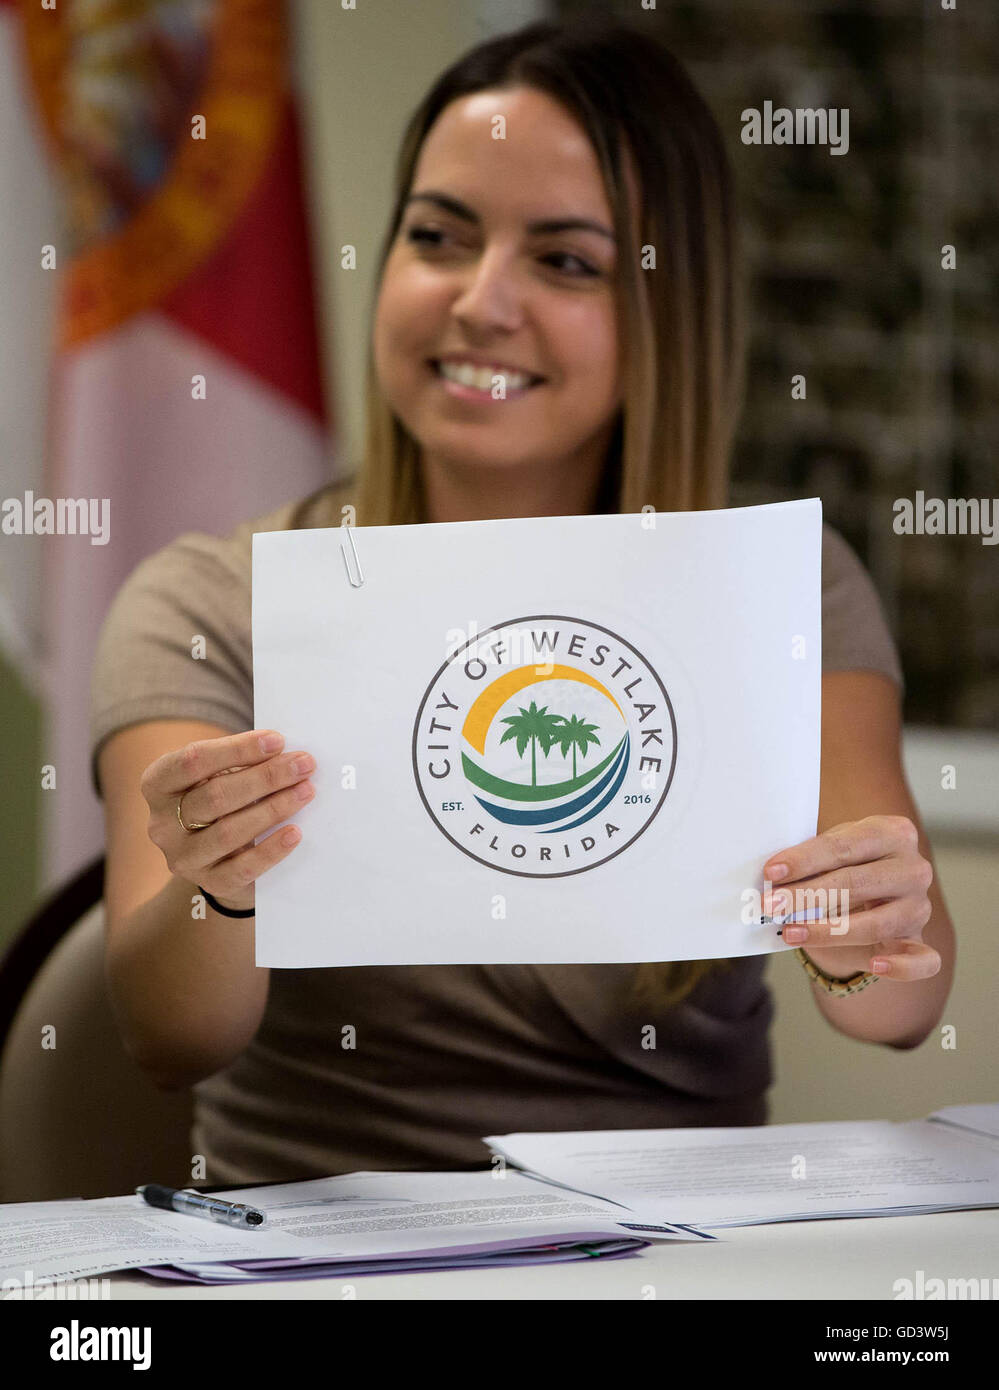 Wellington, Florida, USA. 11th July, 2016. City council commissioner Kara Crump votes to approve the new City of Westlake city seal during a city council meeting in Westlake, Florida on July 11, 2016. © Allen Eyestone/The Palm Beach Post/ZUMA Wire/Alamy Live News Stock Photo